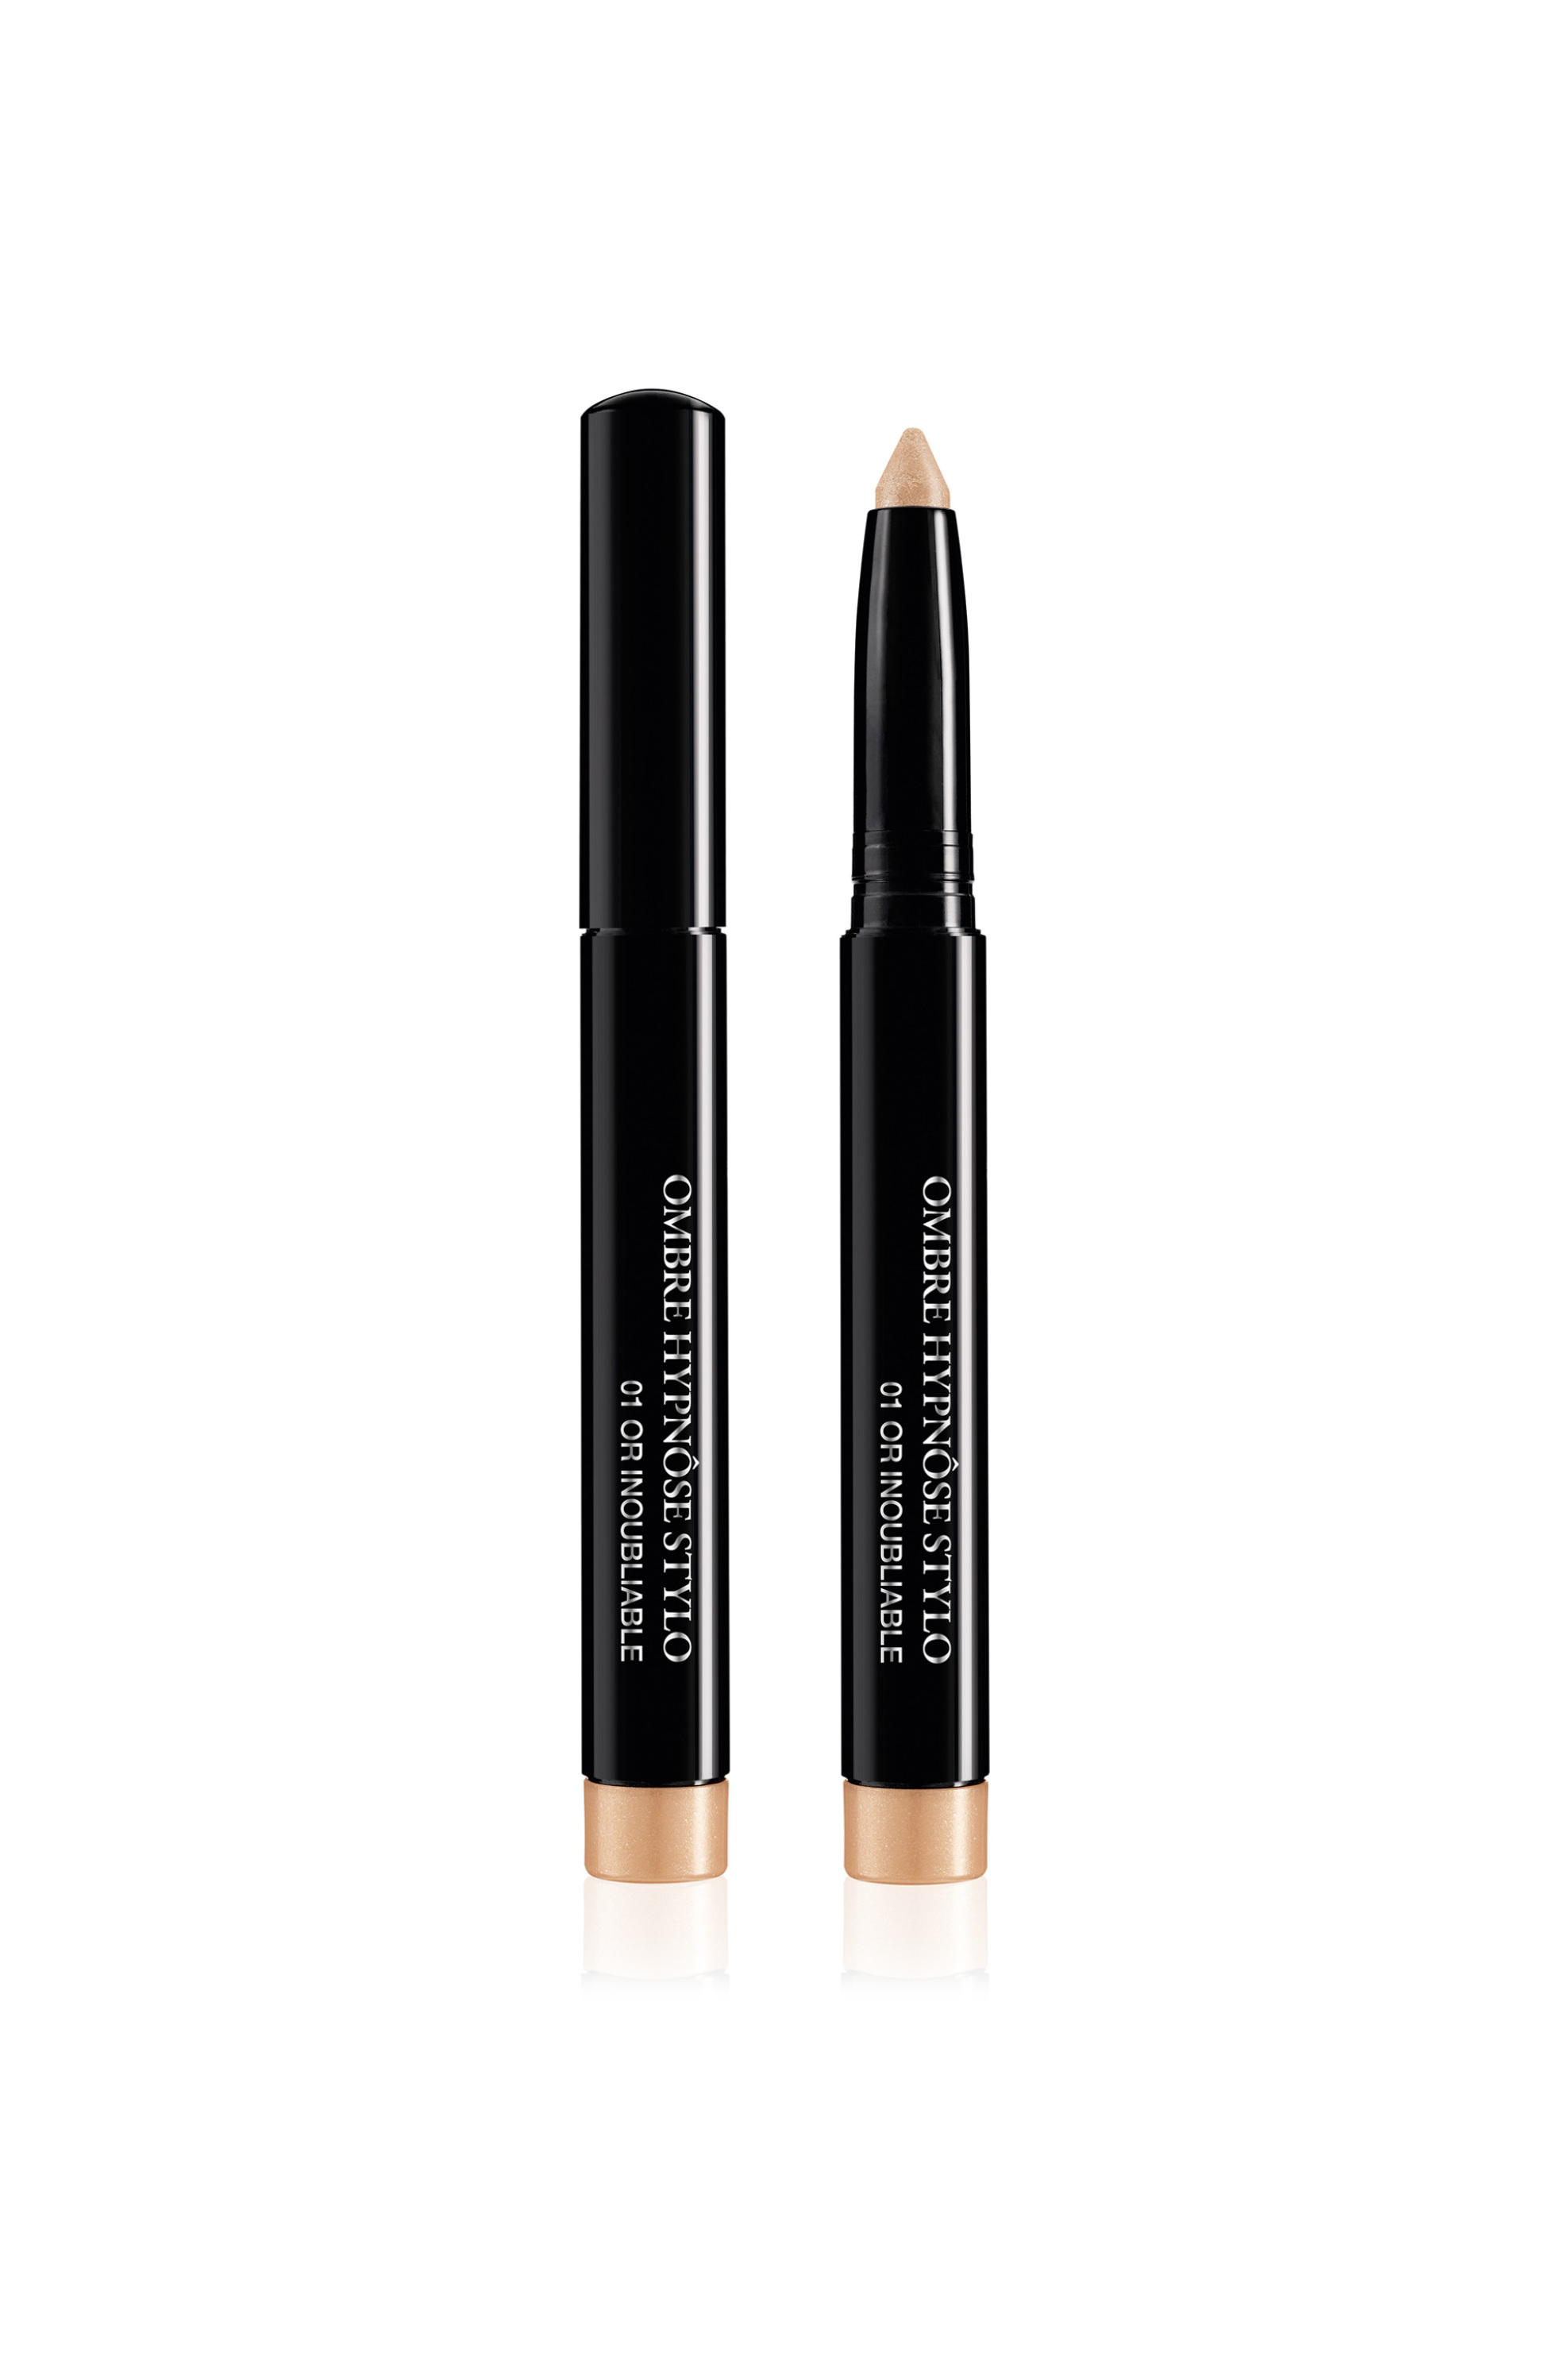 Lancôme Ombre Hypnôse Intense 24h Eyeshadow Stick - 3605533330142 01 Or Inubliable 959278501957